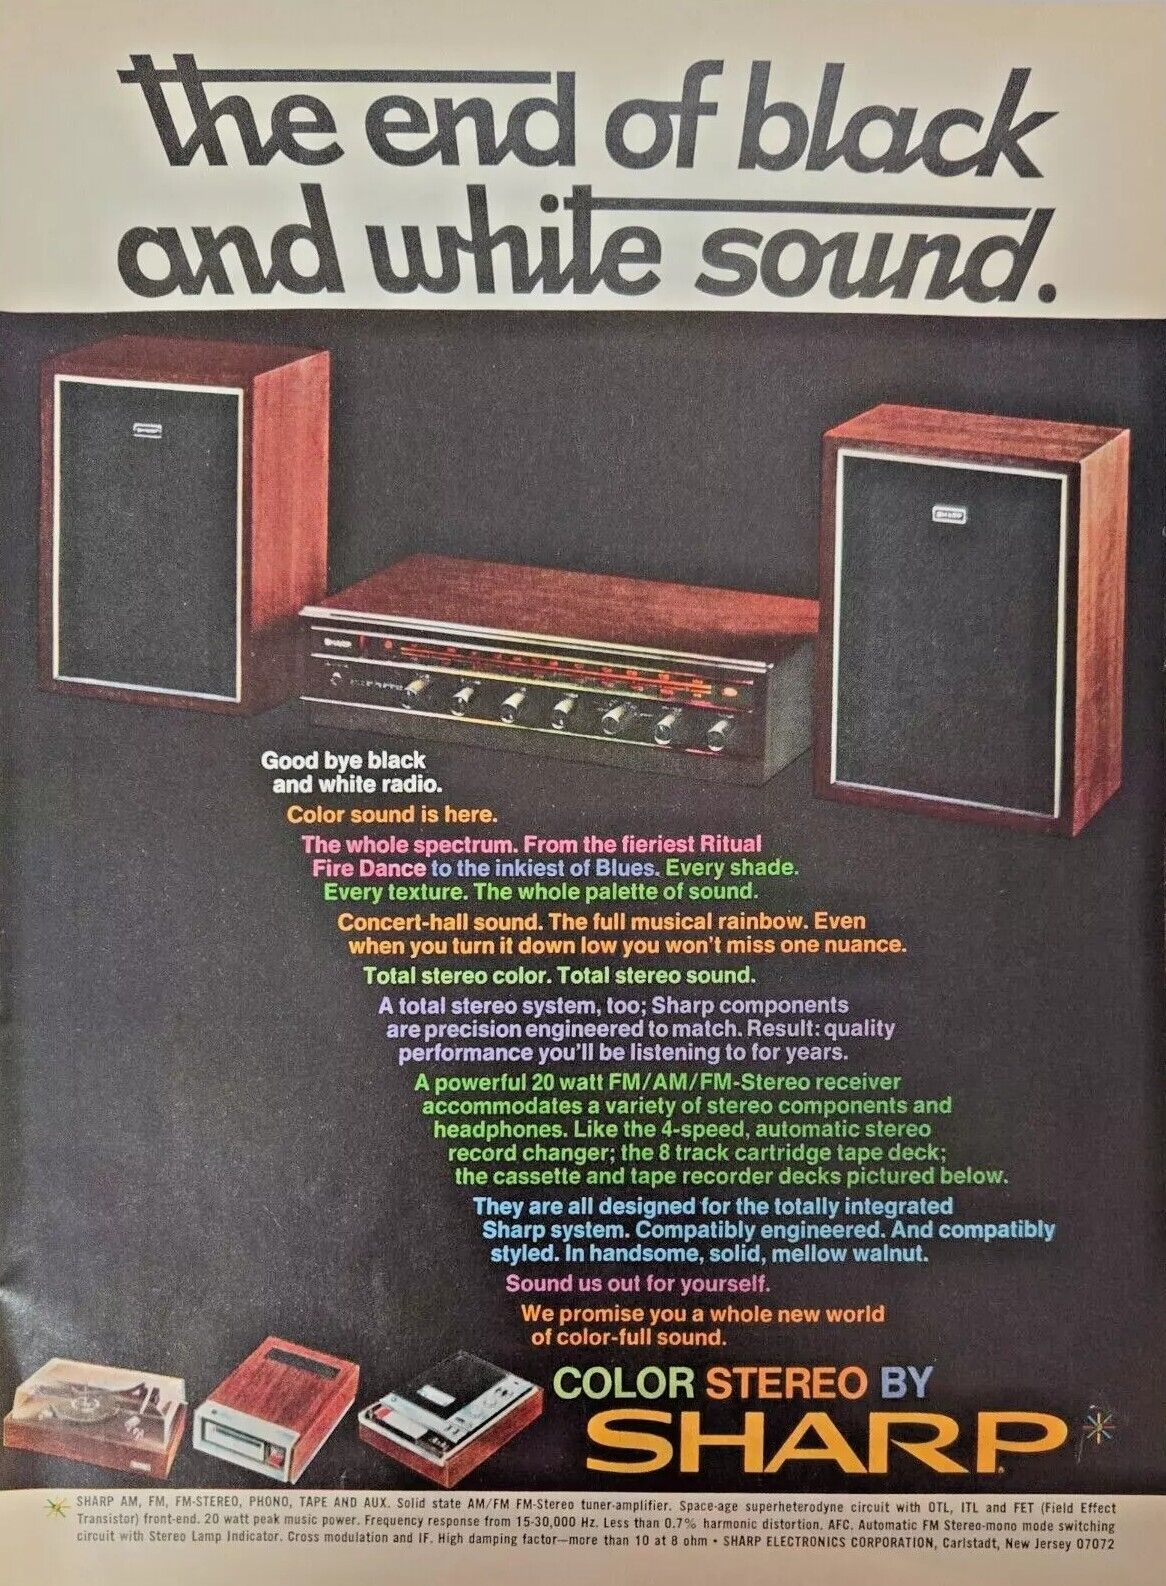 1969 SHARP Radio Color Stereo the End of Black and White Sound Vintage Print Ad